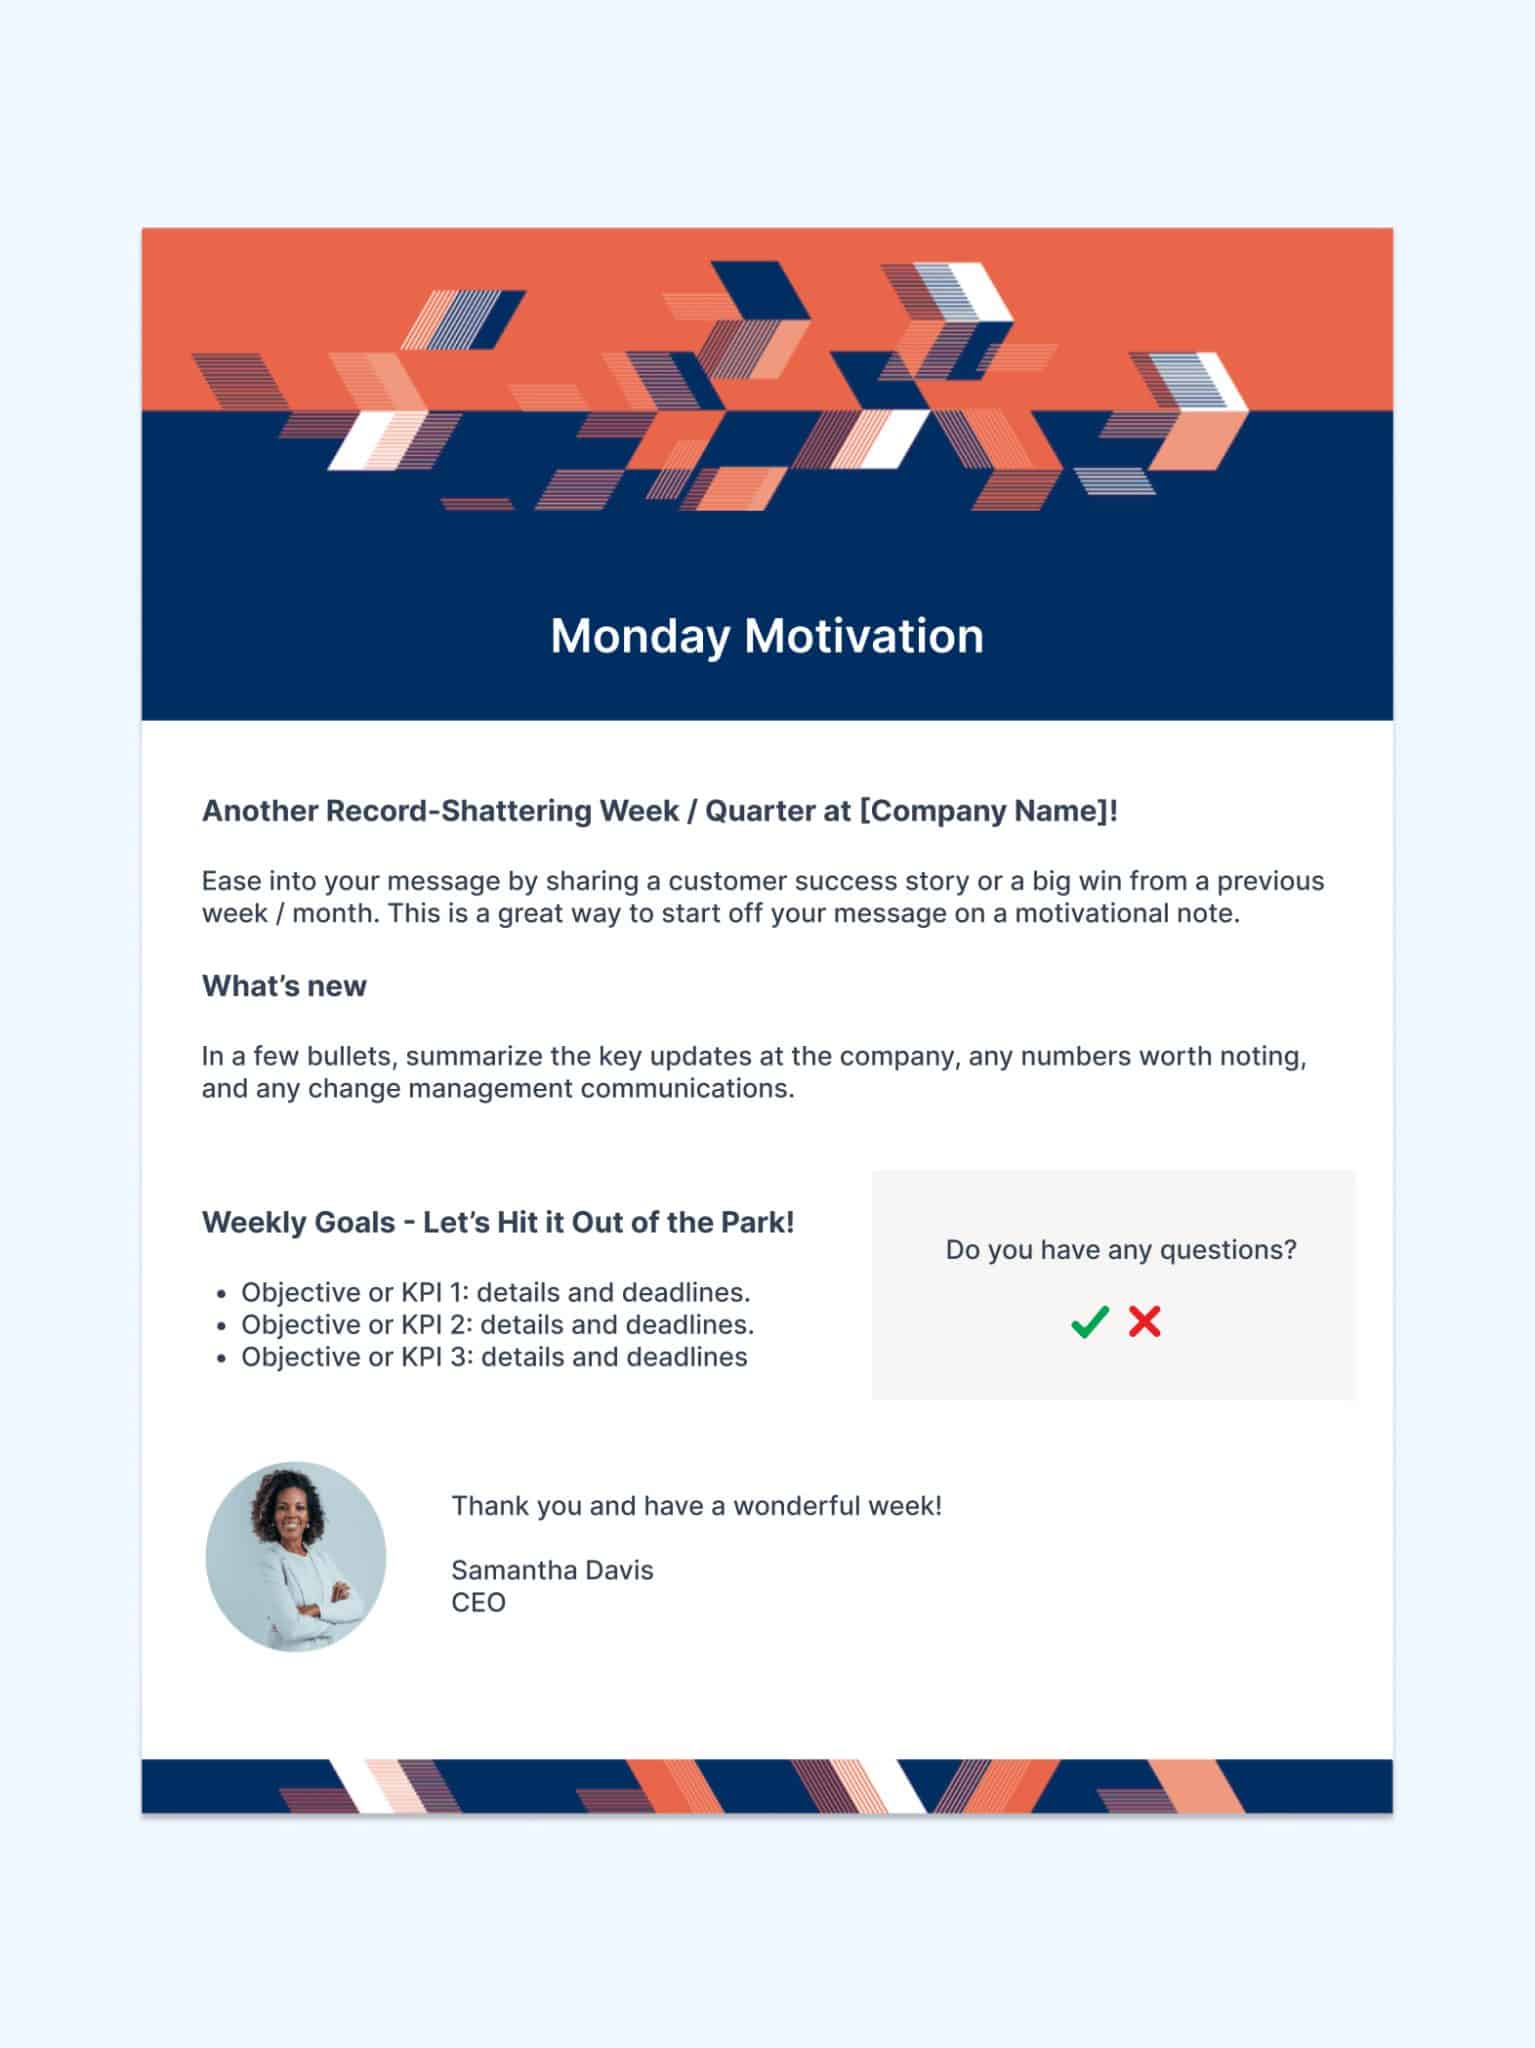 Sample email design for a "Monday Motivation" newsletter email from the CEO. 